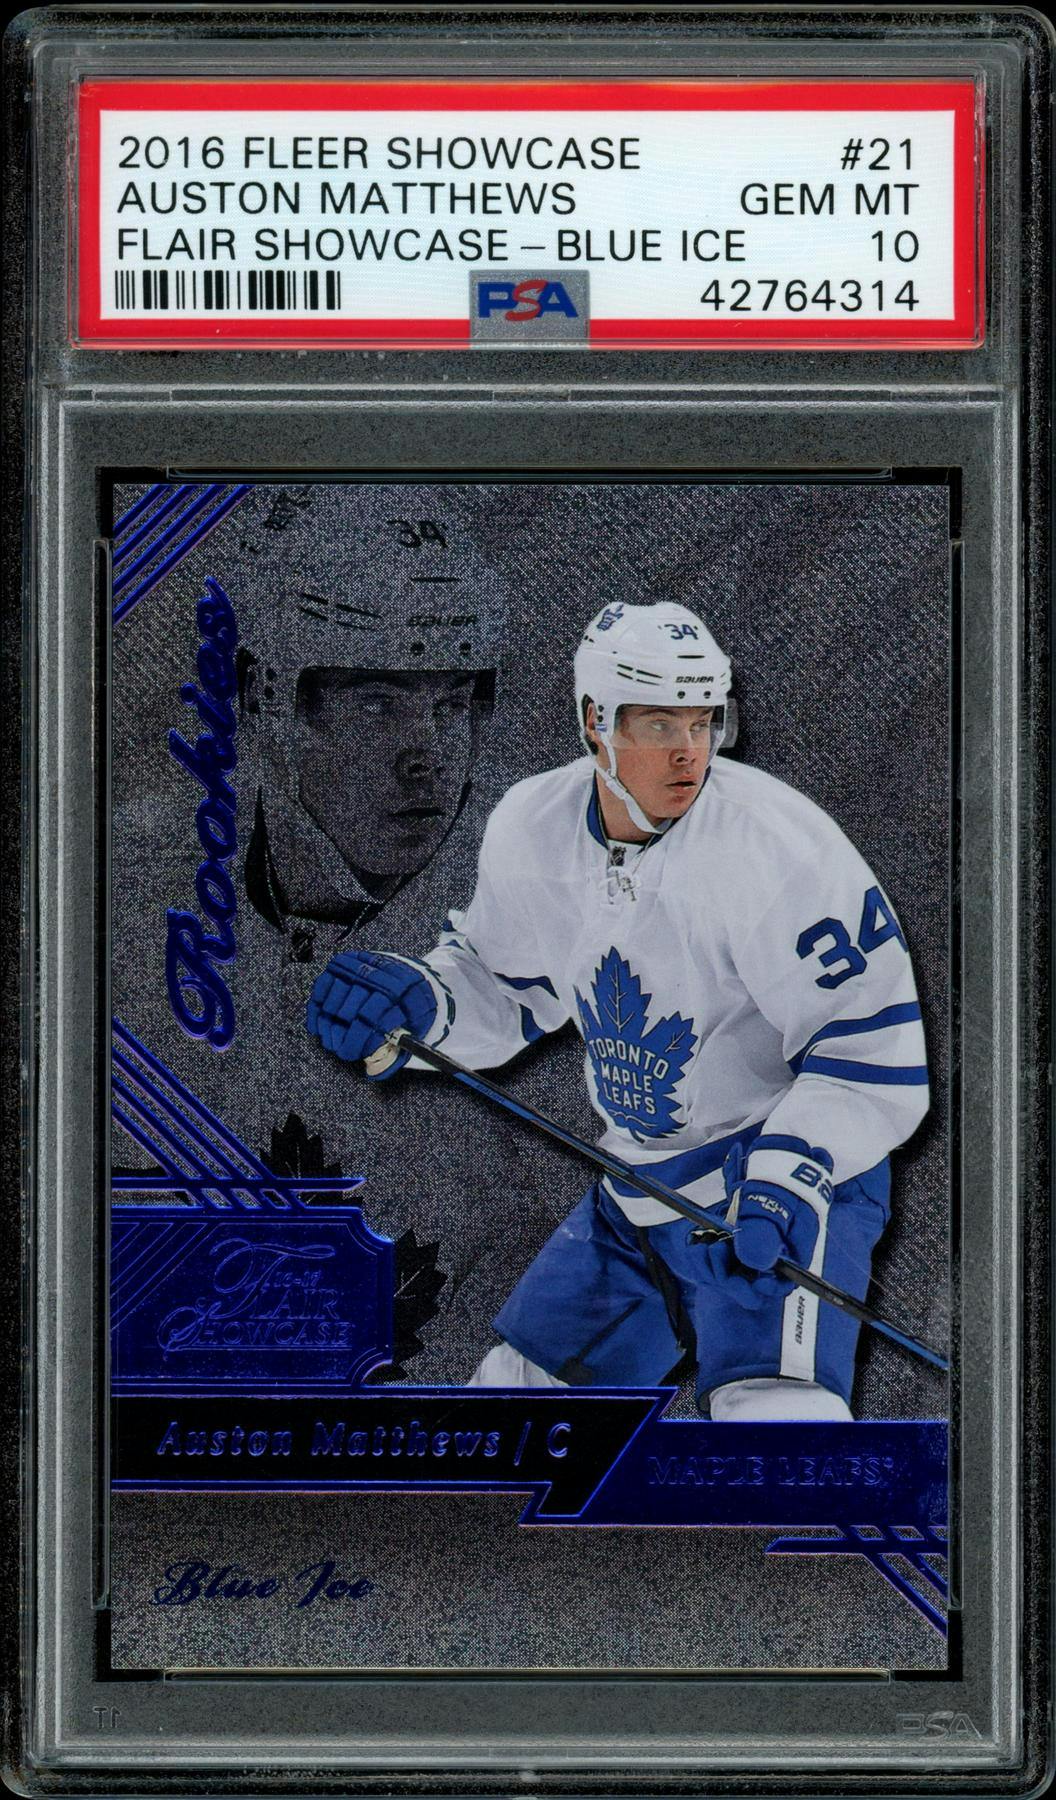 2022/23 Hit Parade Autographed Hockey Jersey Officially Licensed Series 9 Hobby Box - Auston Matthews